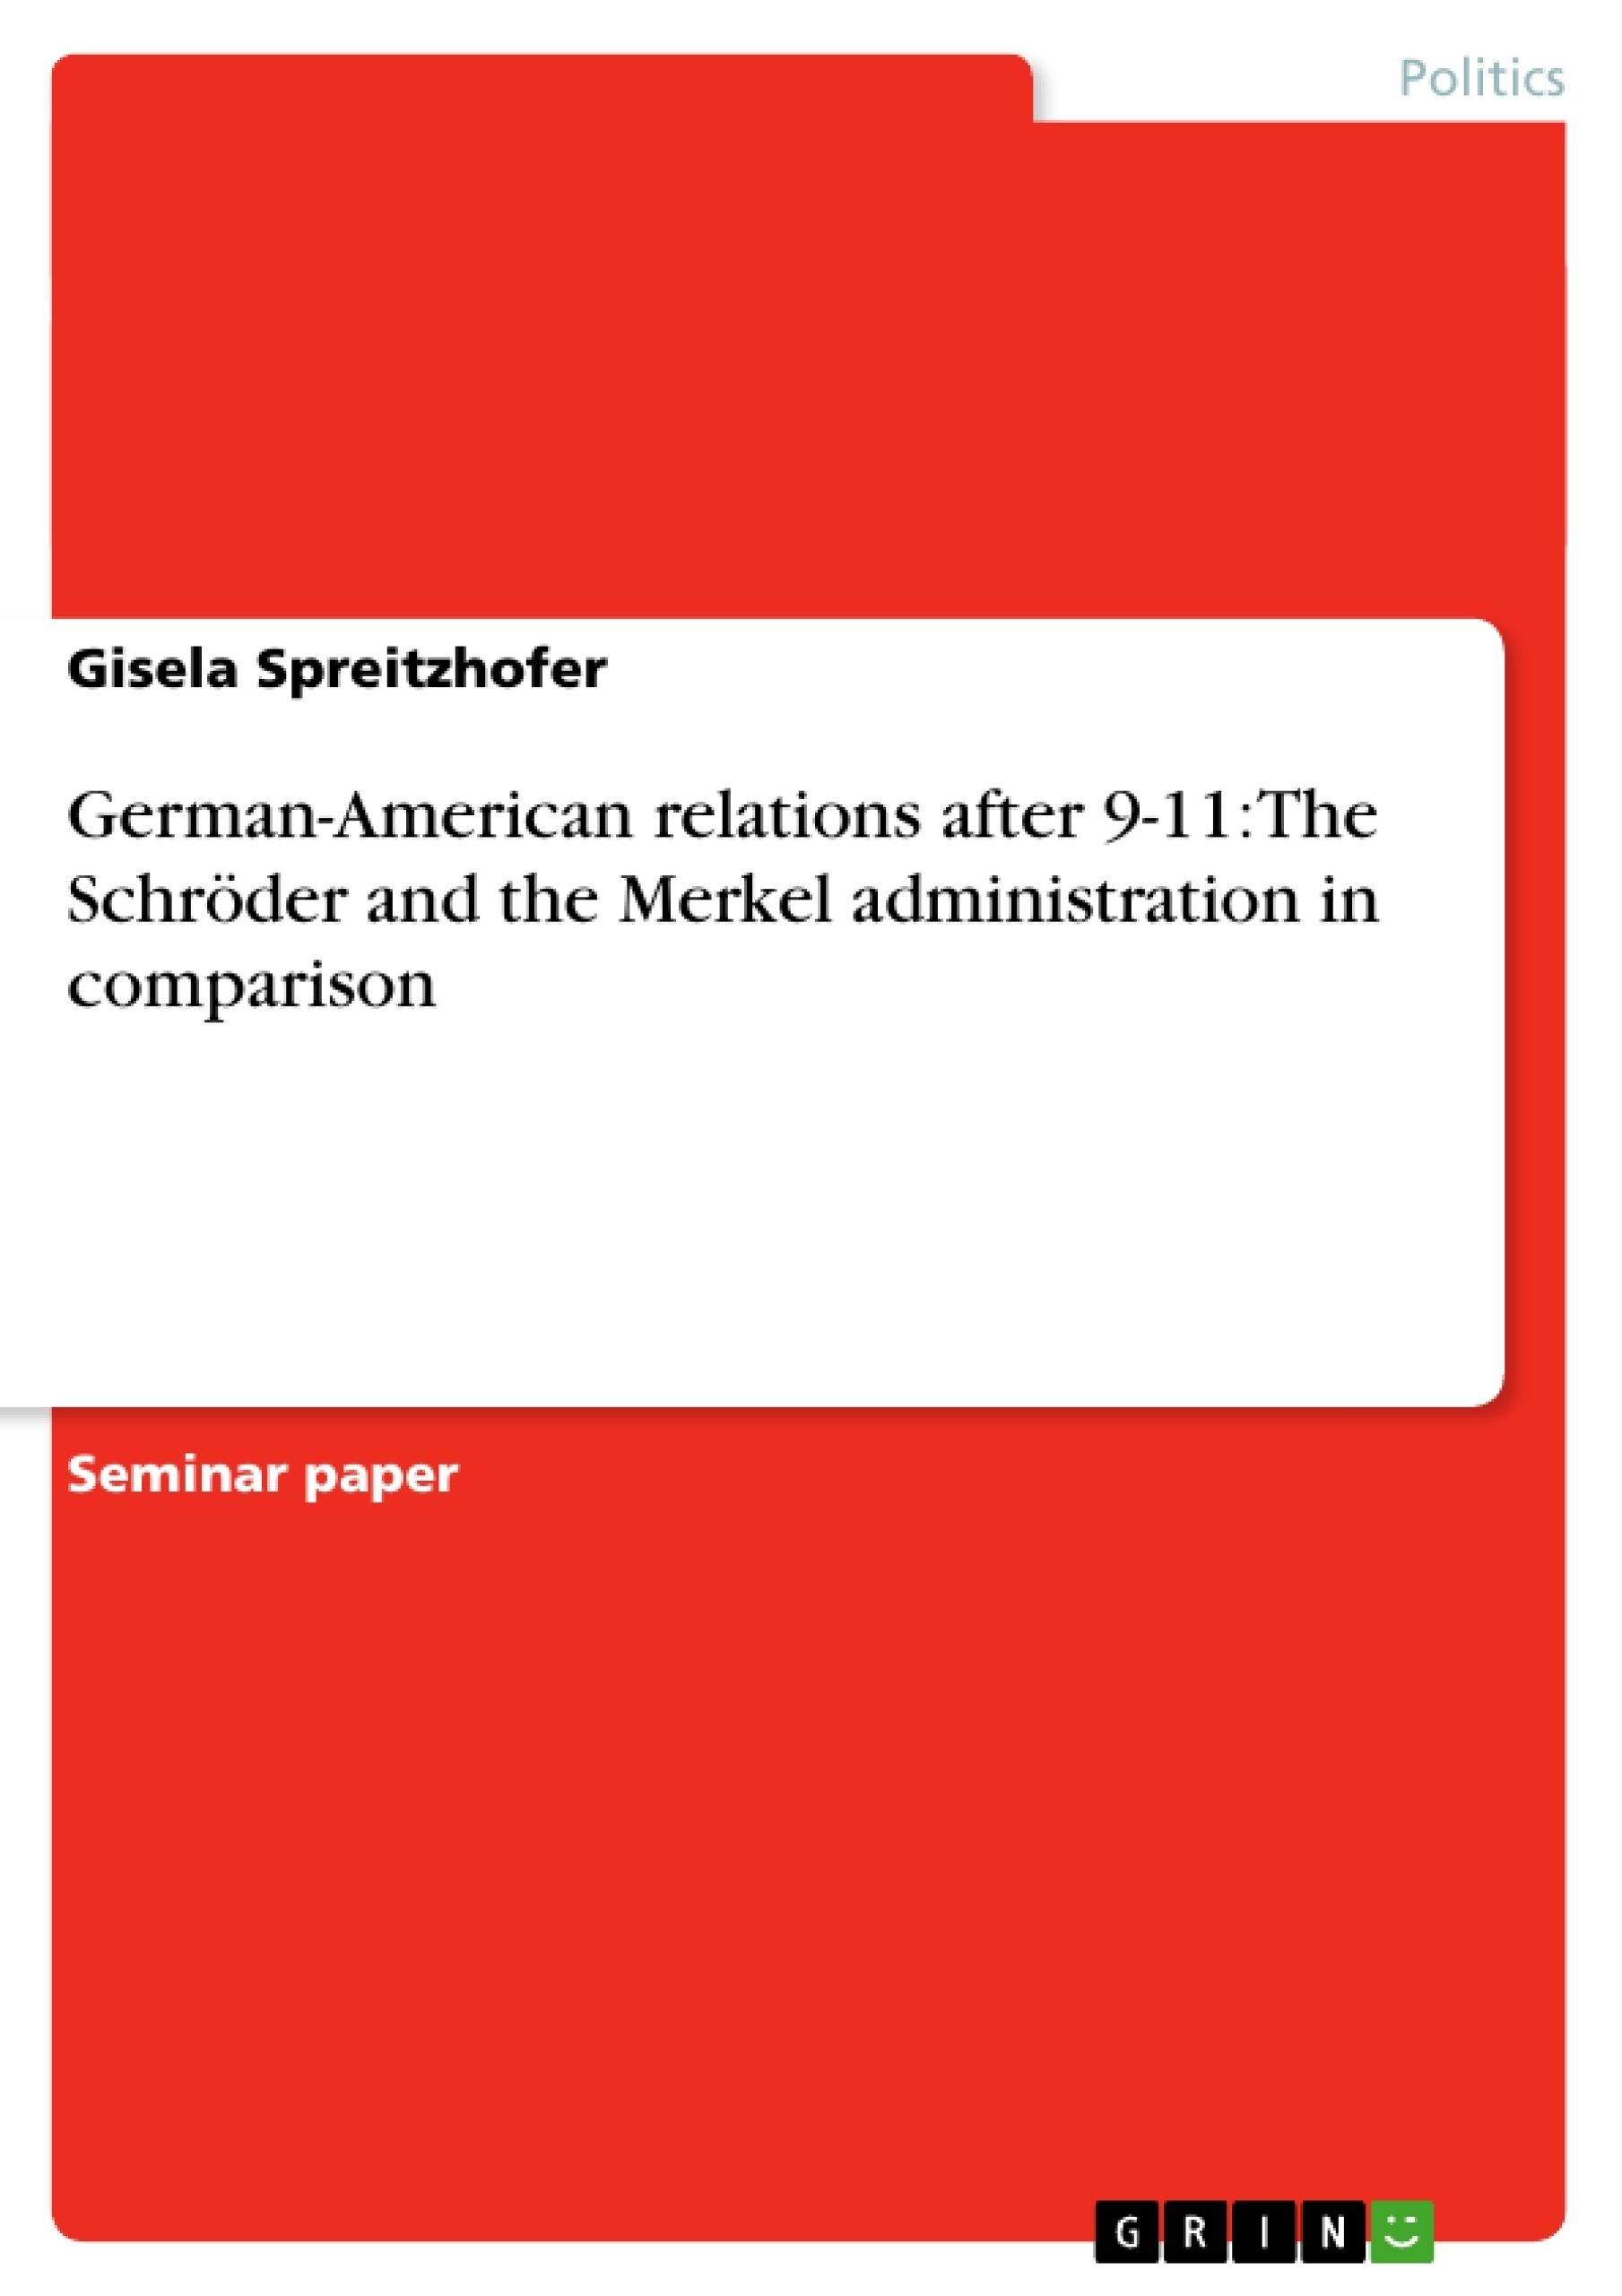 Título: German-American relations after 9-11: The Schröder and the Merkel administration in comparison